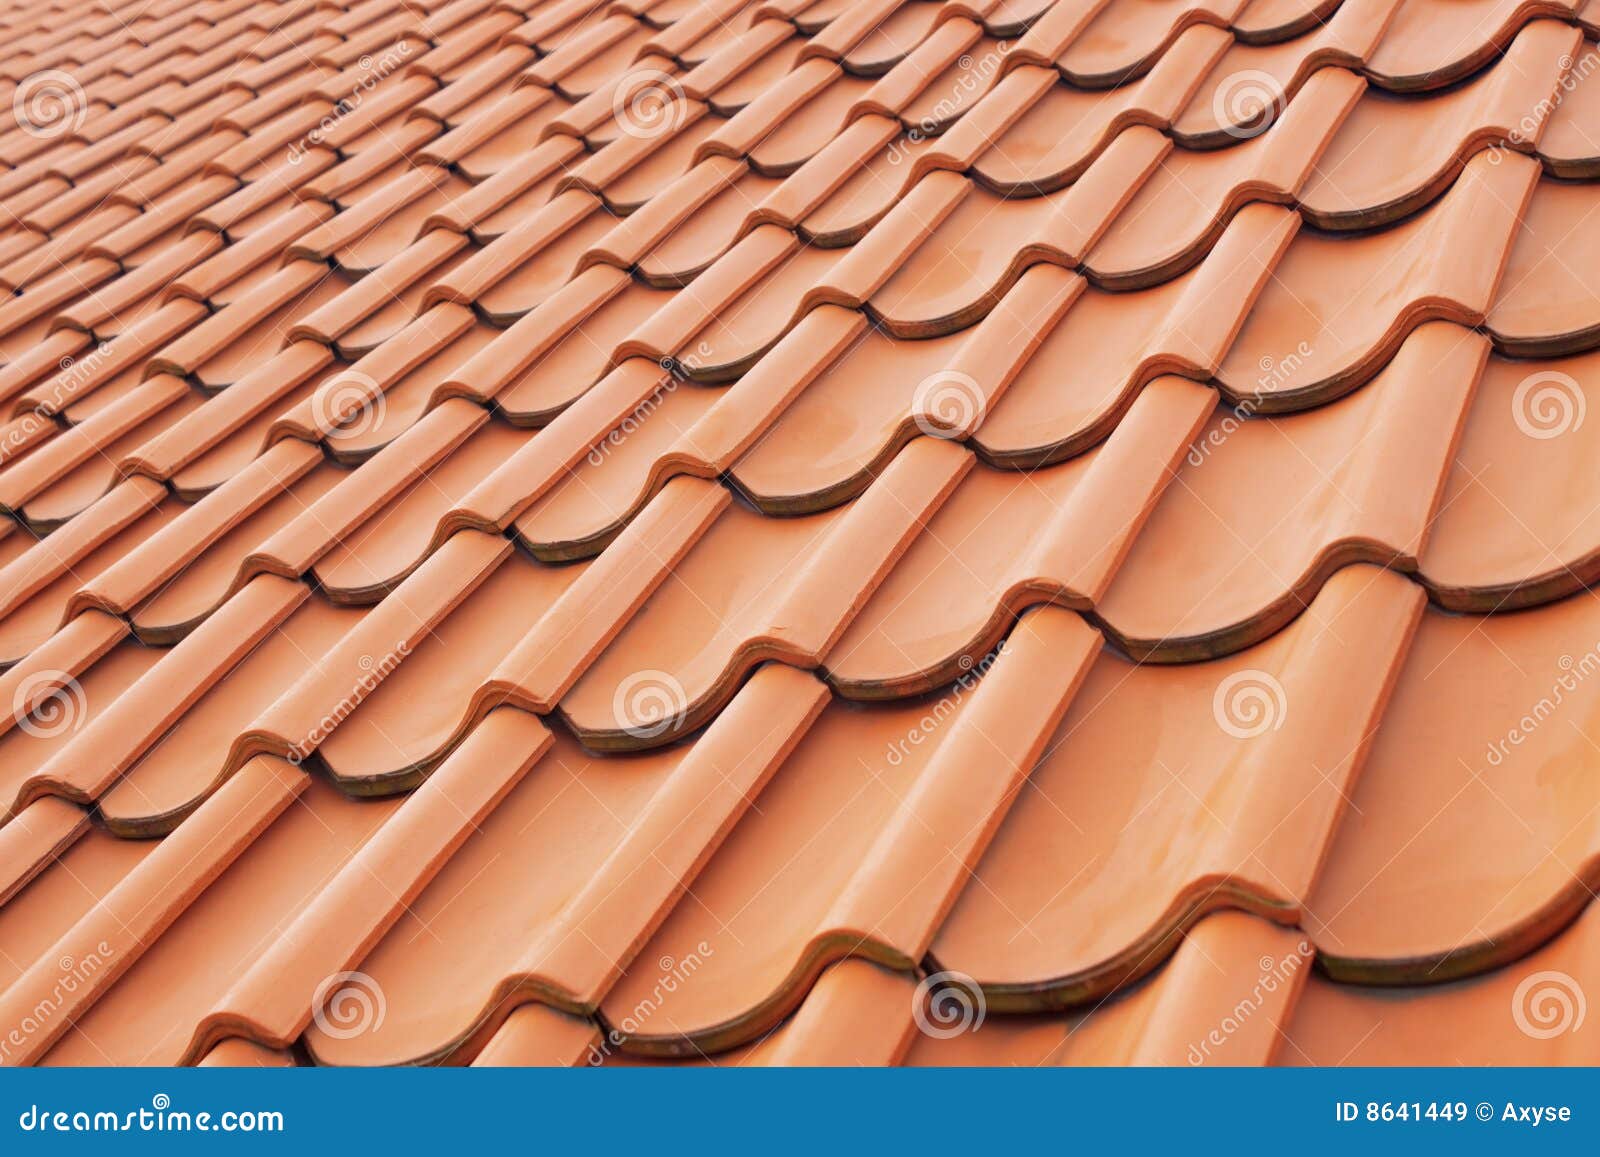 background perspective of red roof tiles